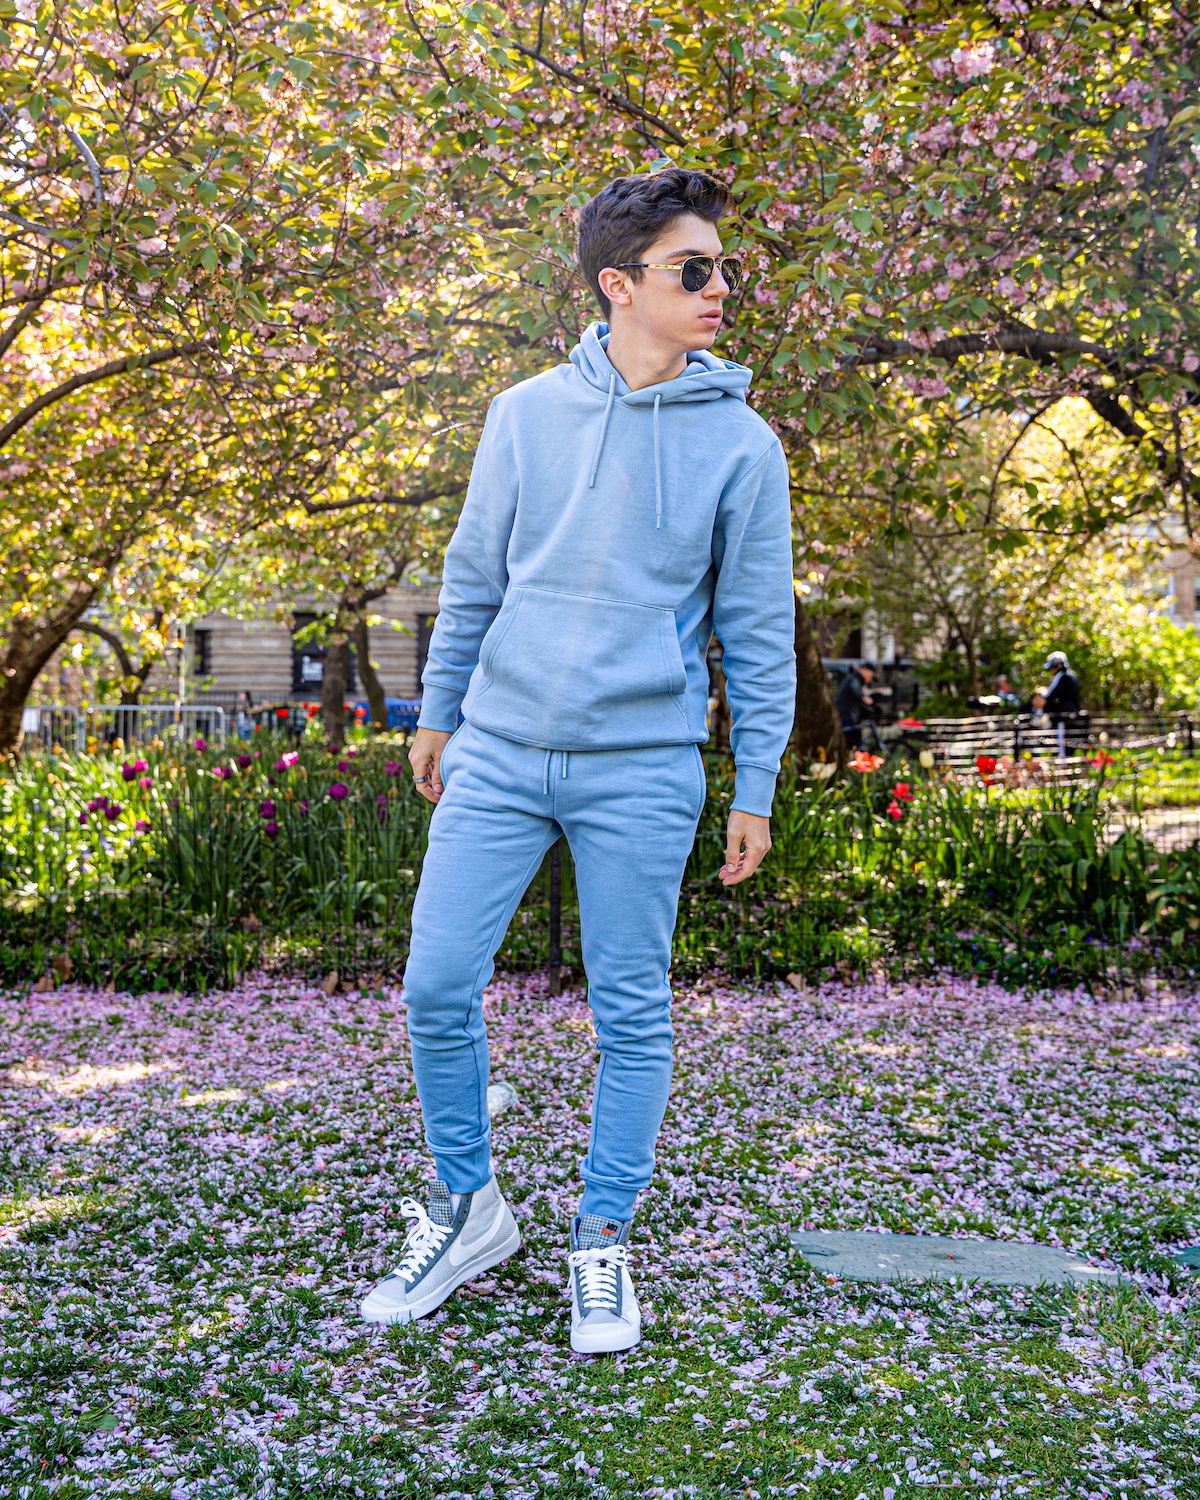 Eitan wears a blue pastel Topman sweatshirt and sweatpants from ASOS and Nike sneakers in a park in NYC.